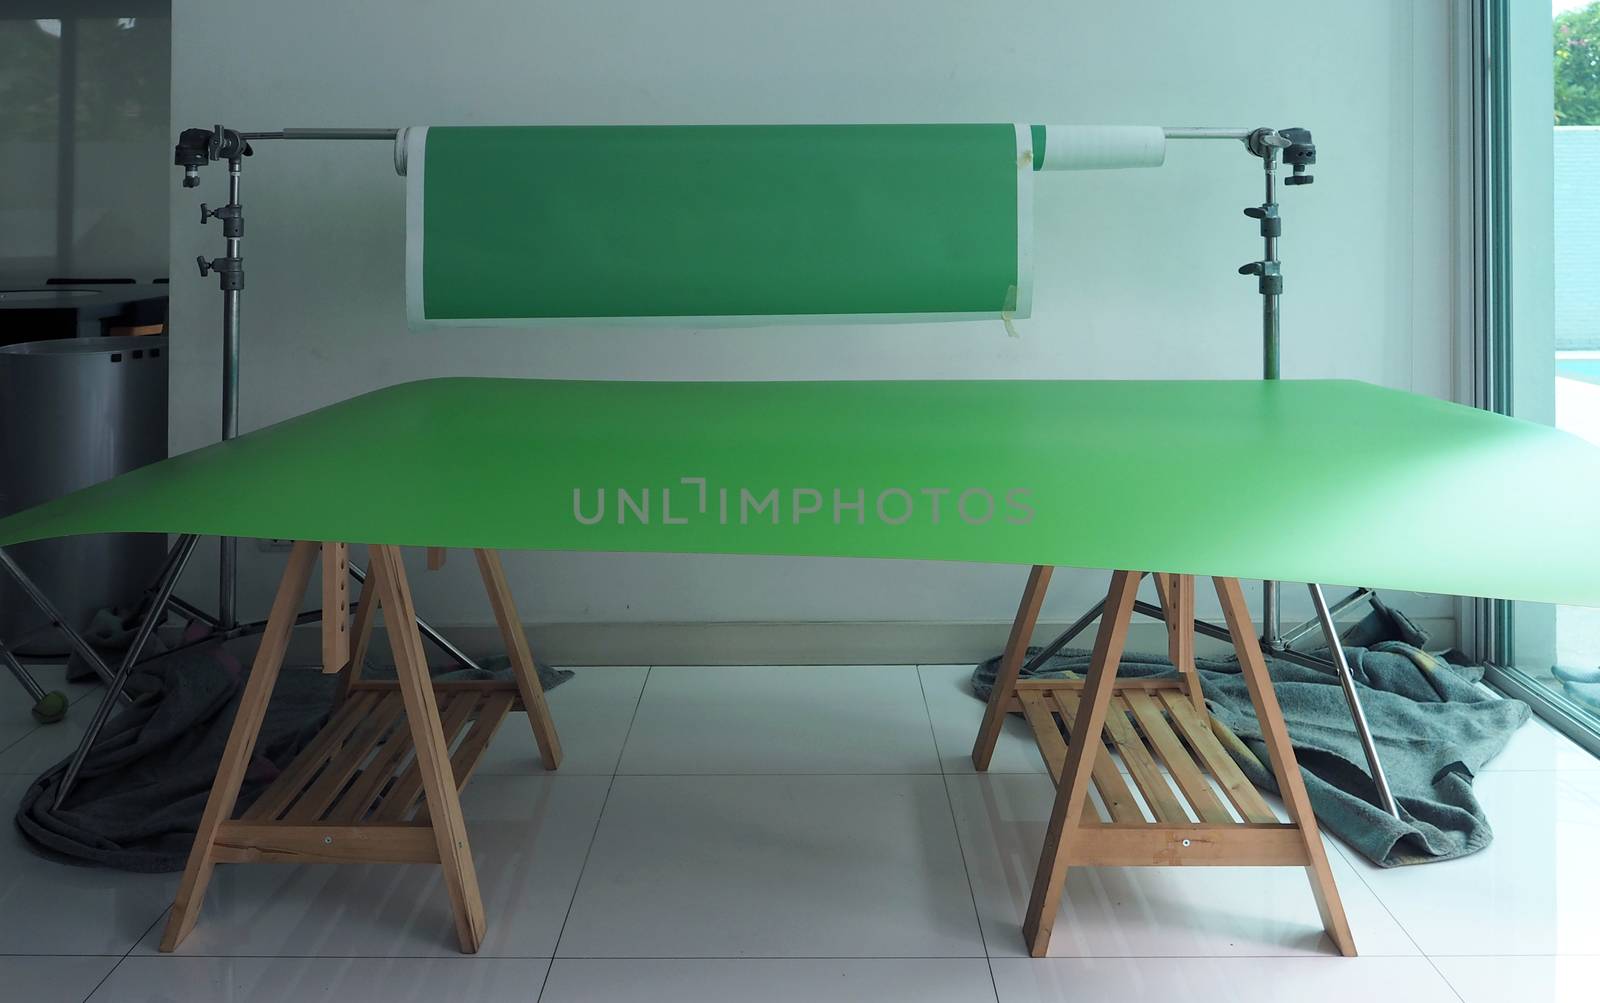 Green screen paper backdrop and tripod. by gnepphoto